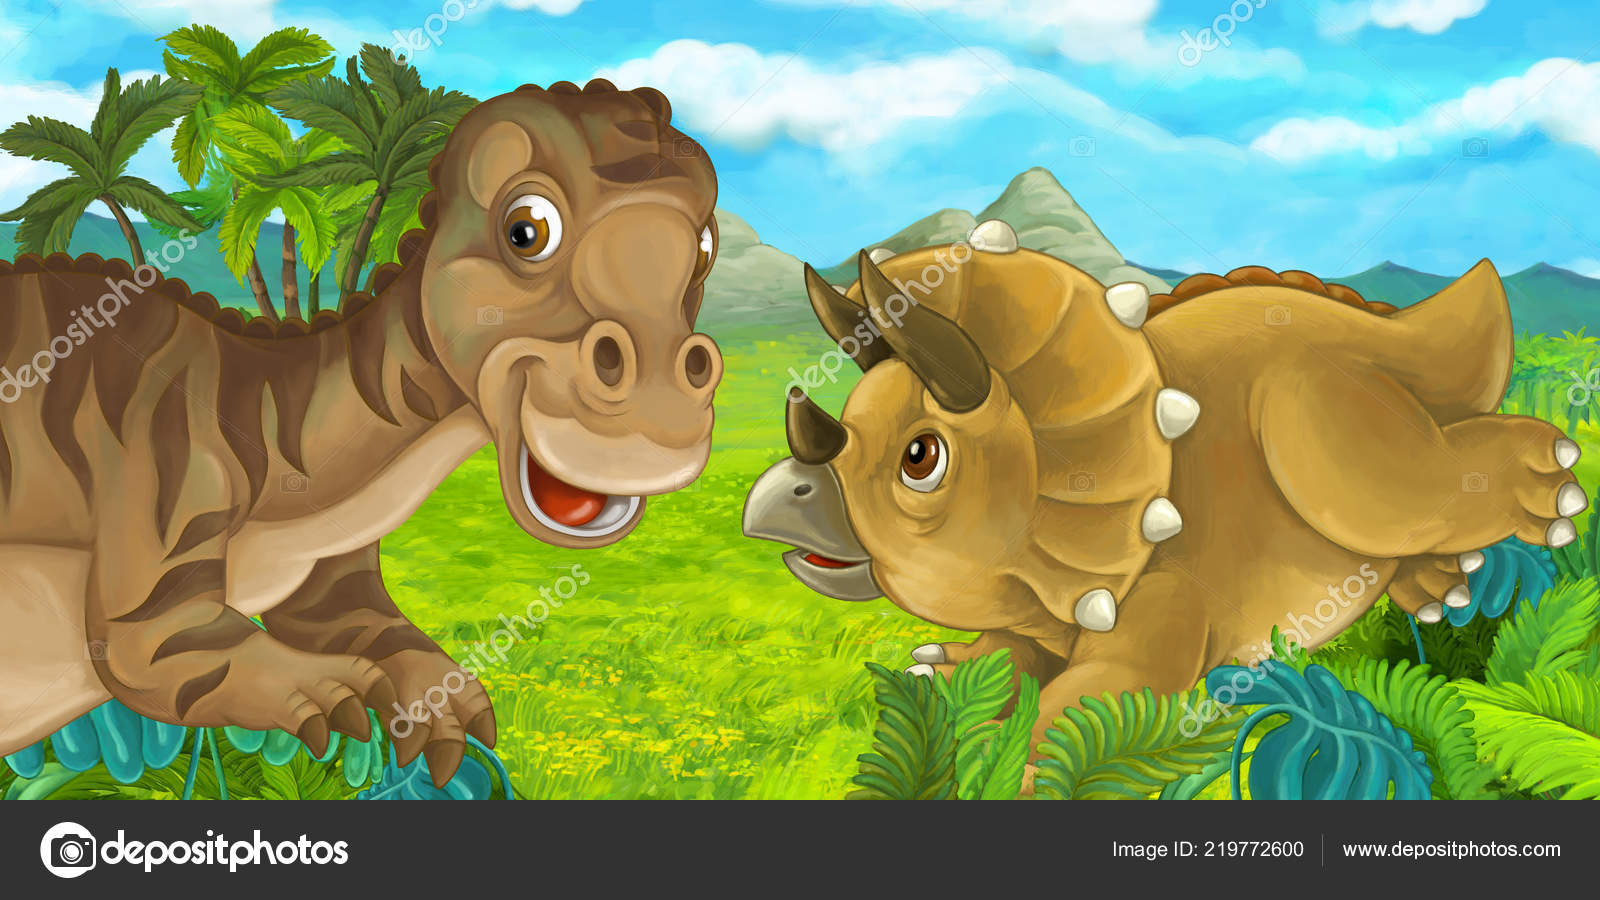 Cartoon Scene Different Dinosaurs Having Fun Together Mayasauria Triceratops  Illustration Stock Photo by ©agaes8080 219772600